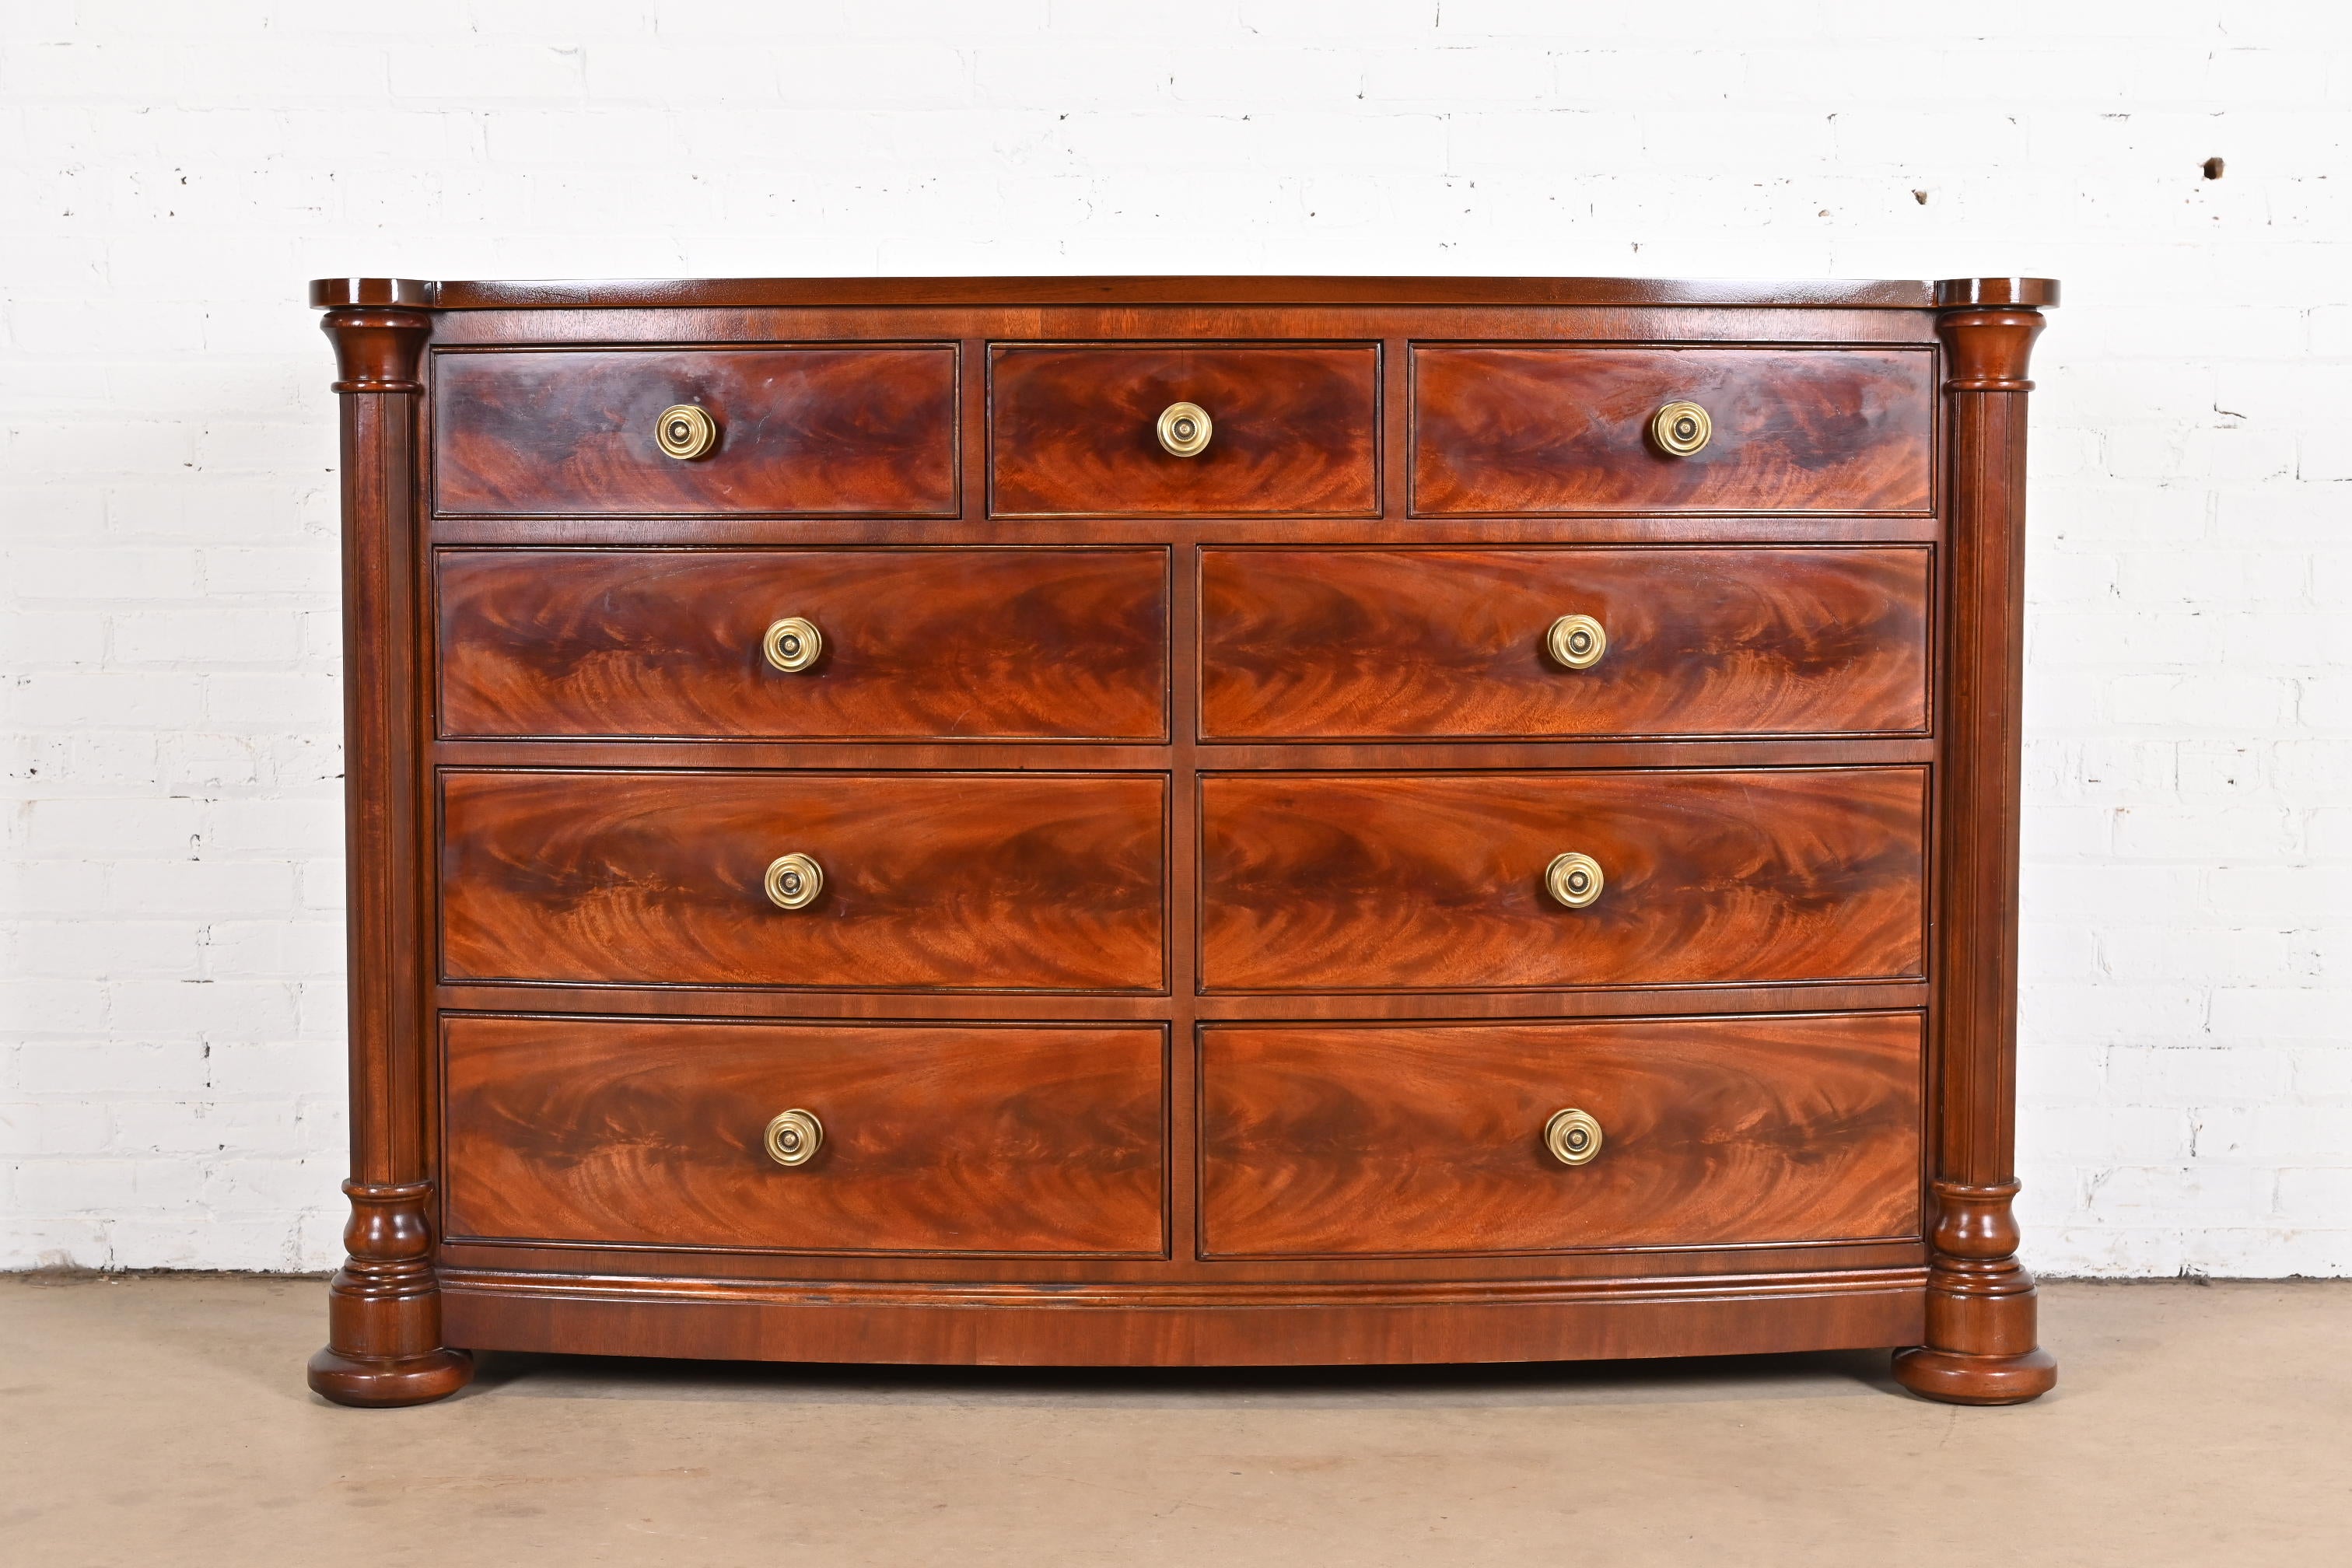 A gorgeous Empire or Georgian style bow front nine-dresser or chest of drawers

In the manner of Ralph Lauren

By Henredon

USA, circa 1980s

Beautiful book-matched flame mahogany, with carved mahogany columns and original brass